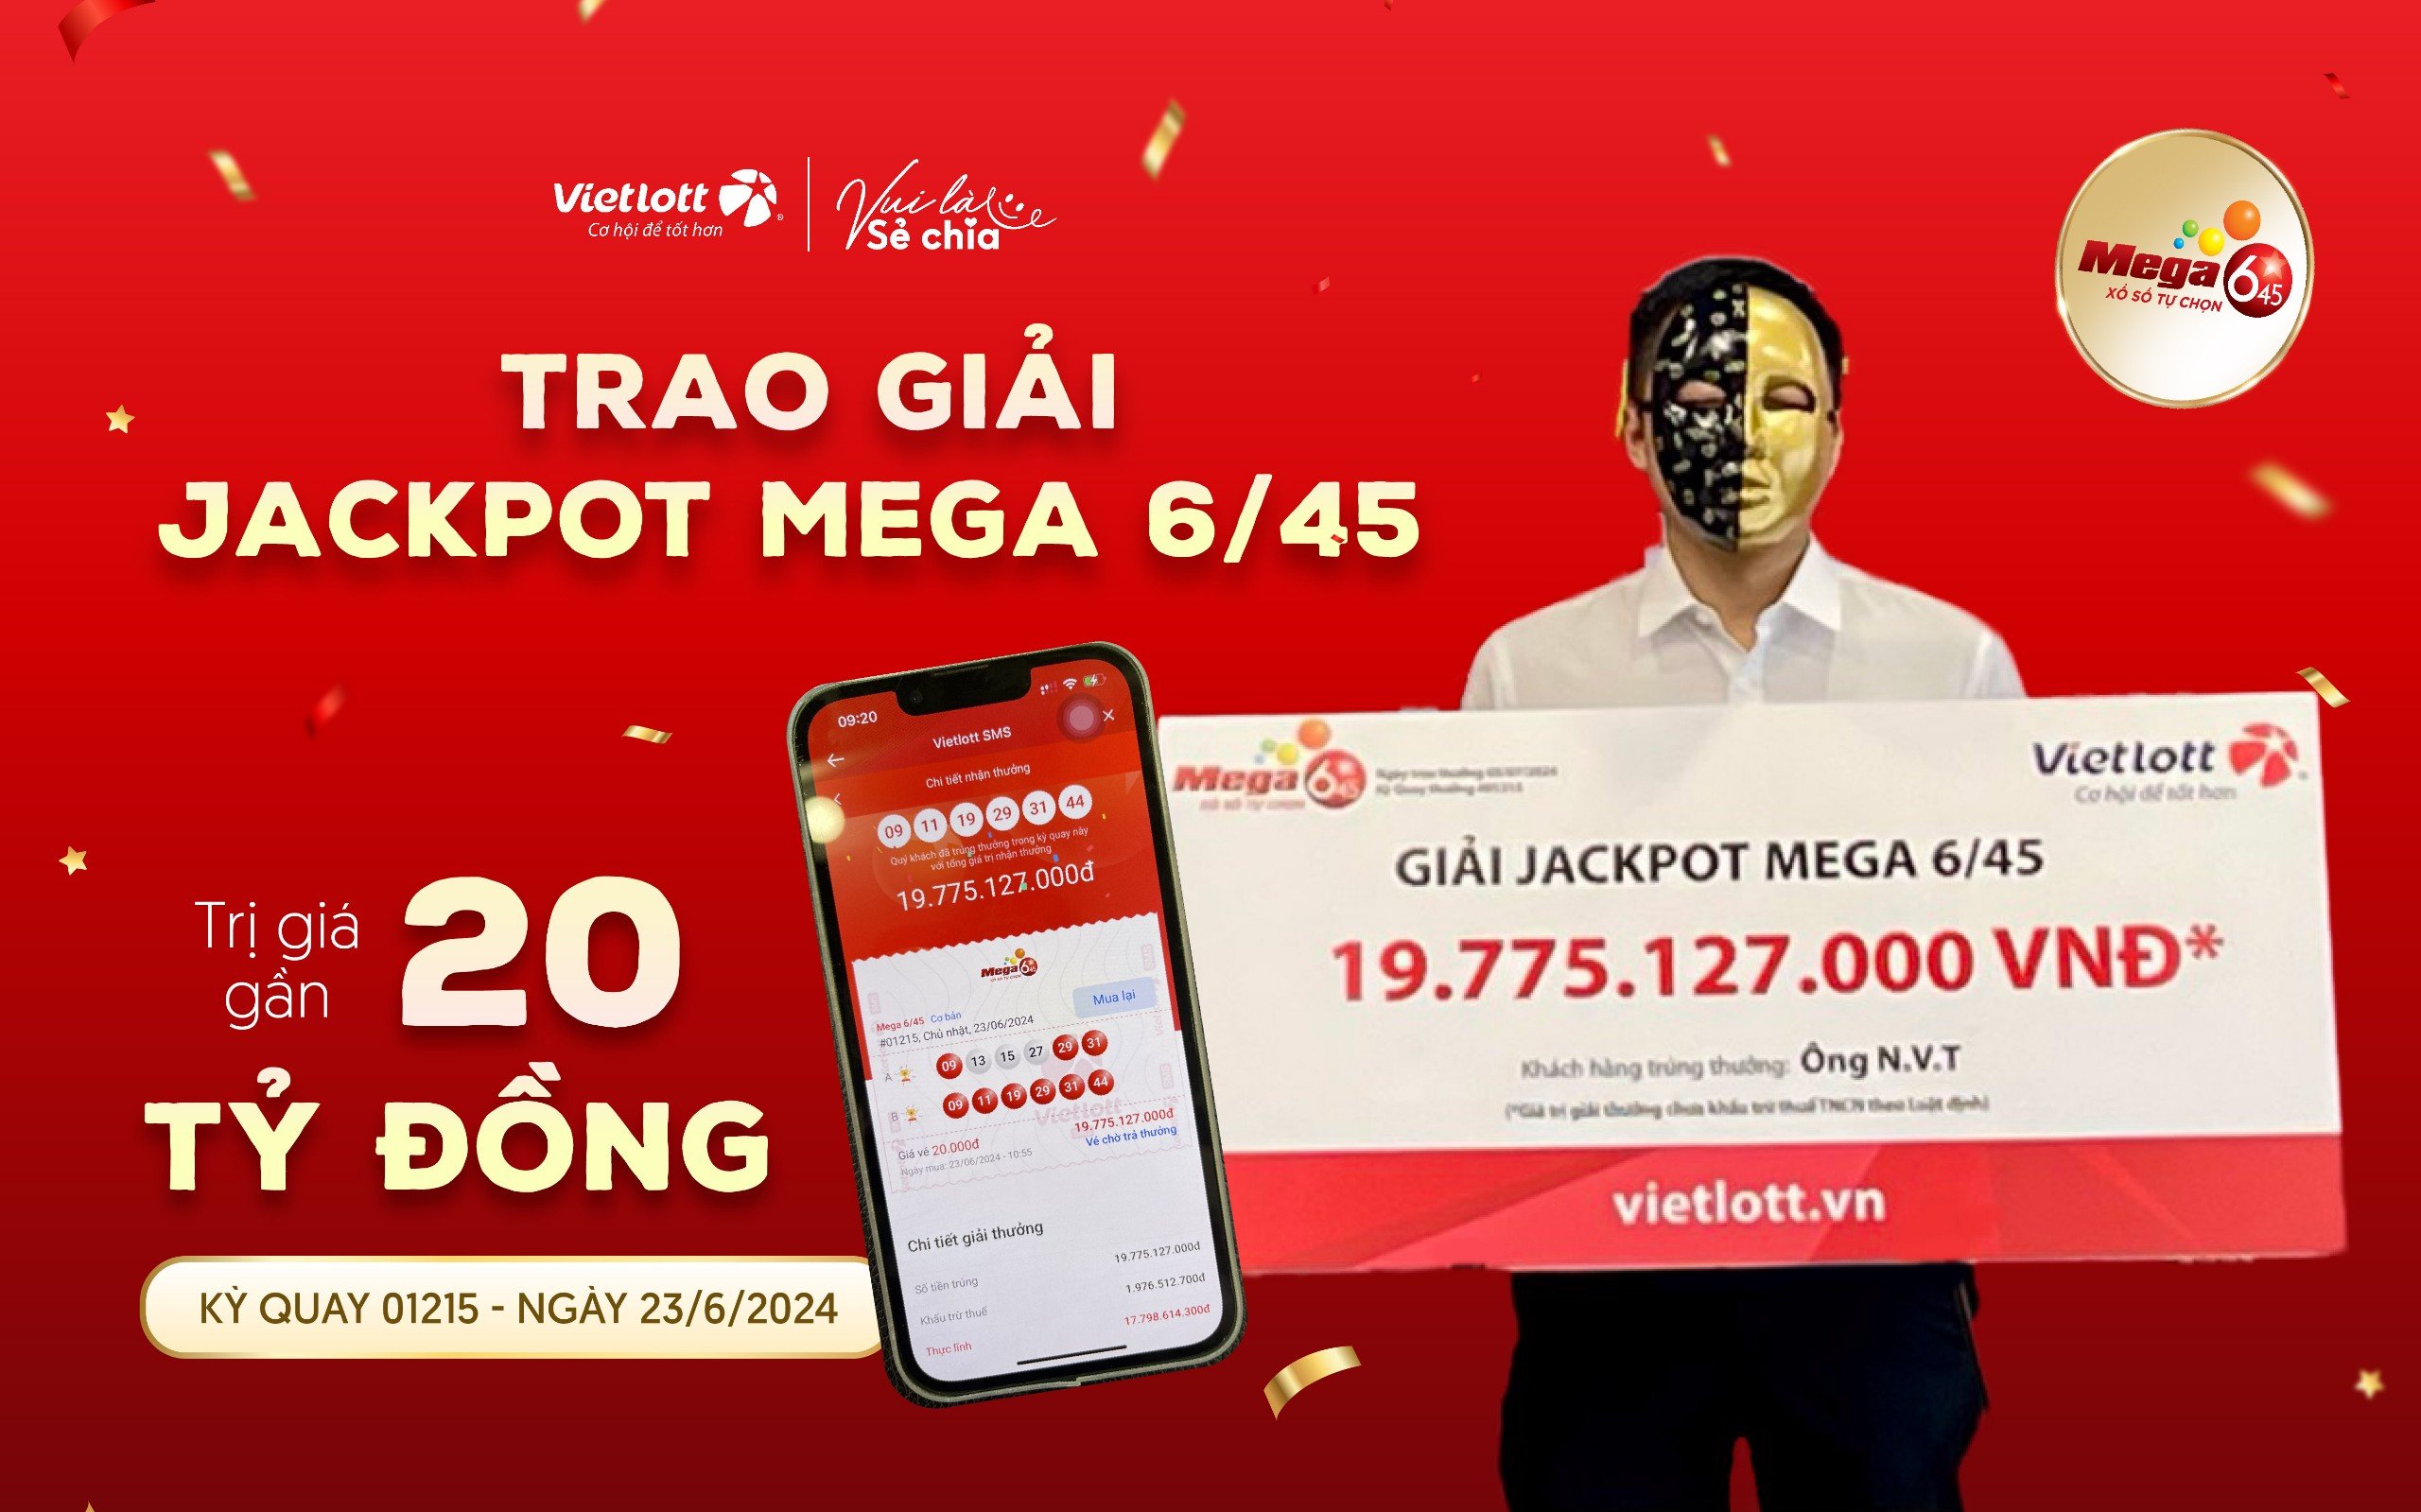 OFFICE WORKER WINS MEGA 6/45 JACKPOT WORTH NEARLY 20 BILLION VND: PRIZE MONEY TO SUPPORT FAMILY